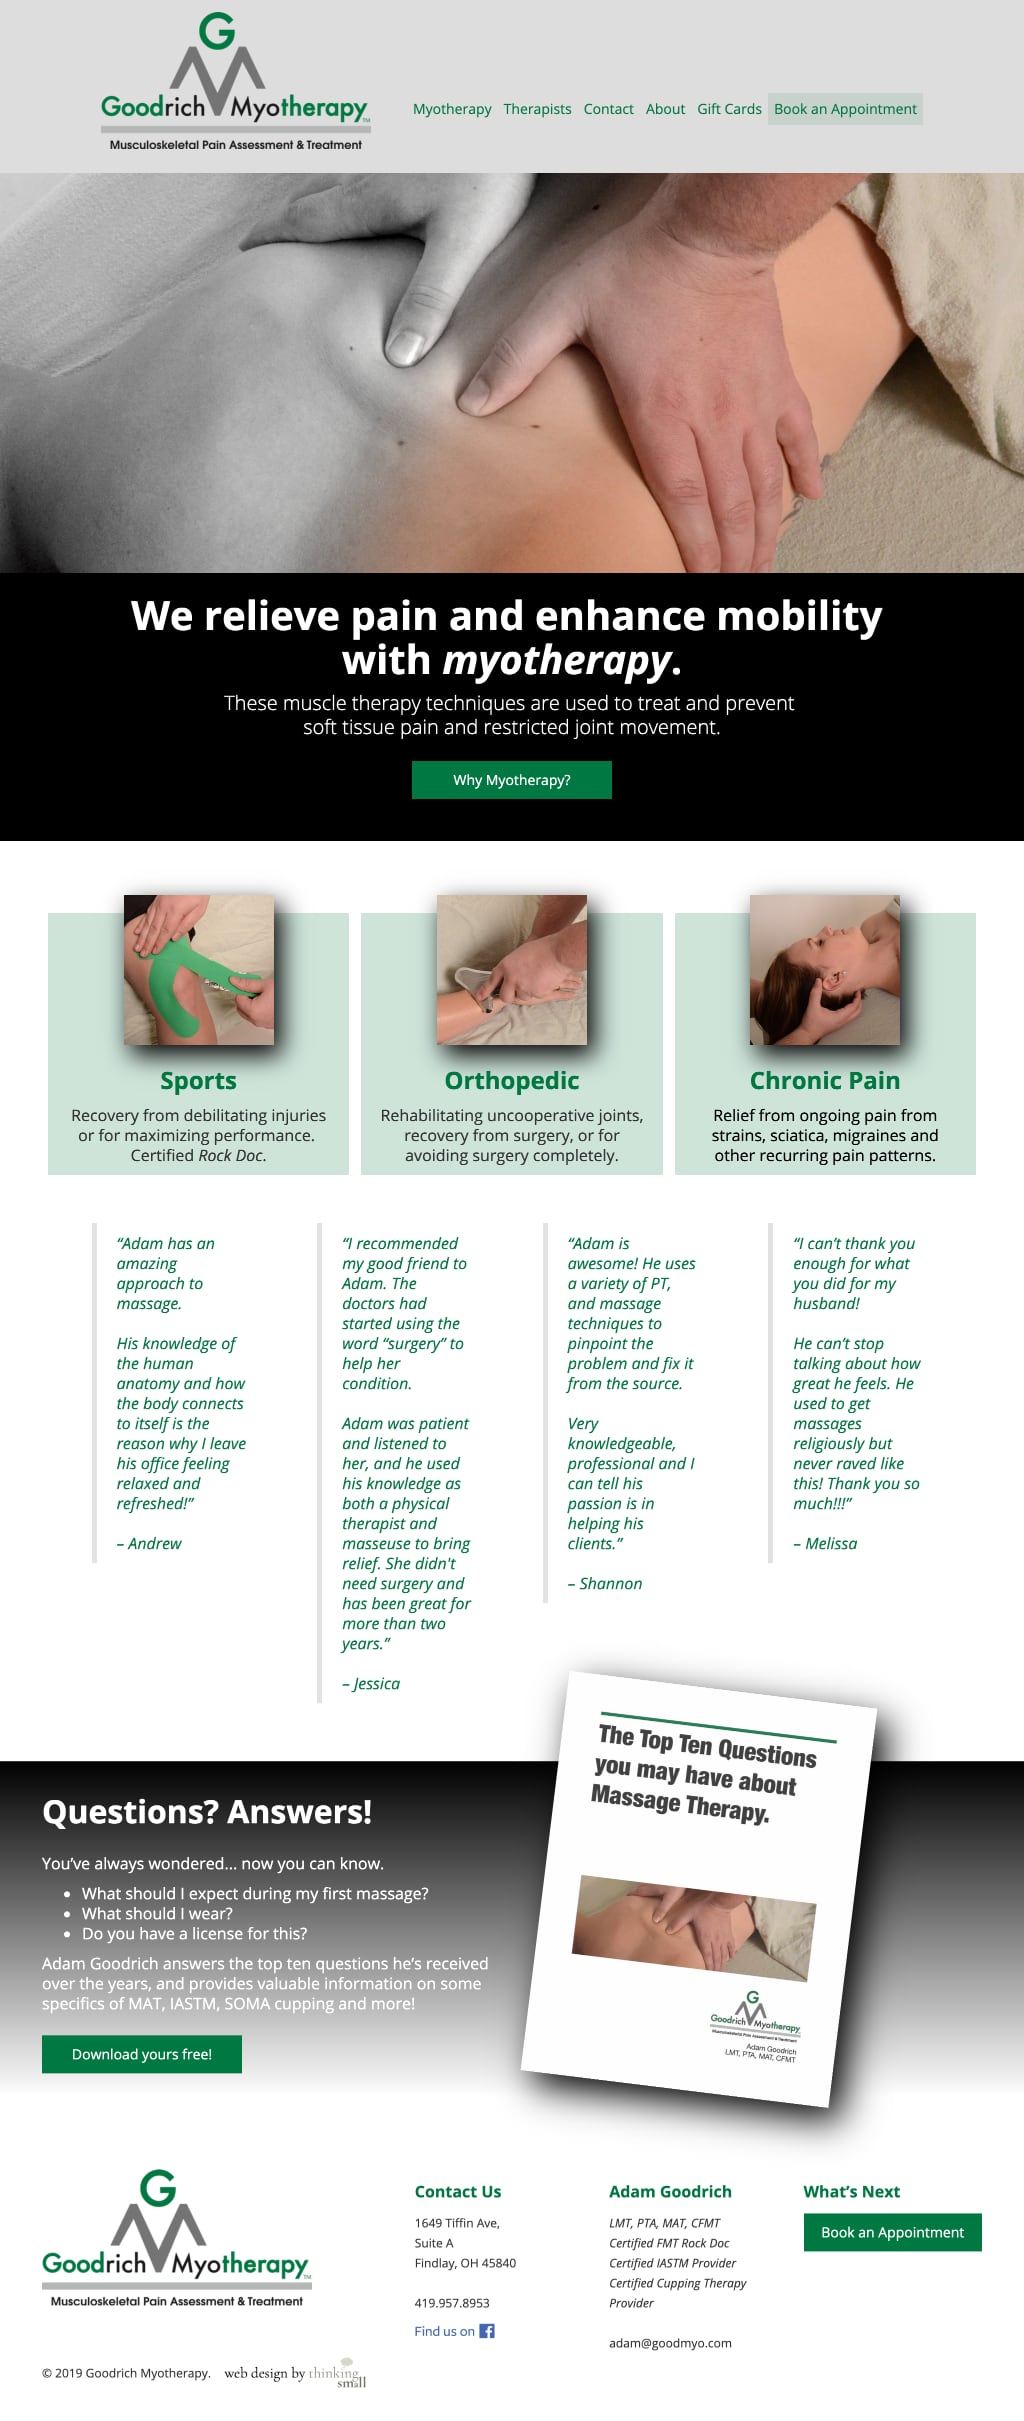 Goodrich Myotherapy Web Page